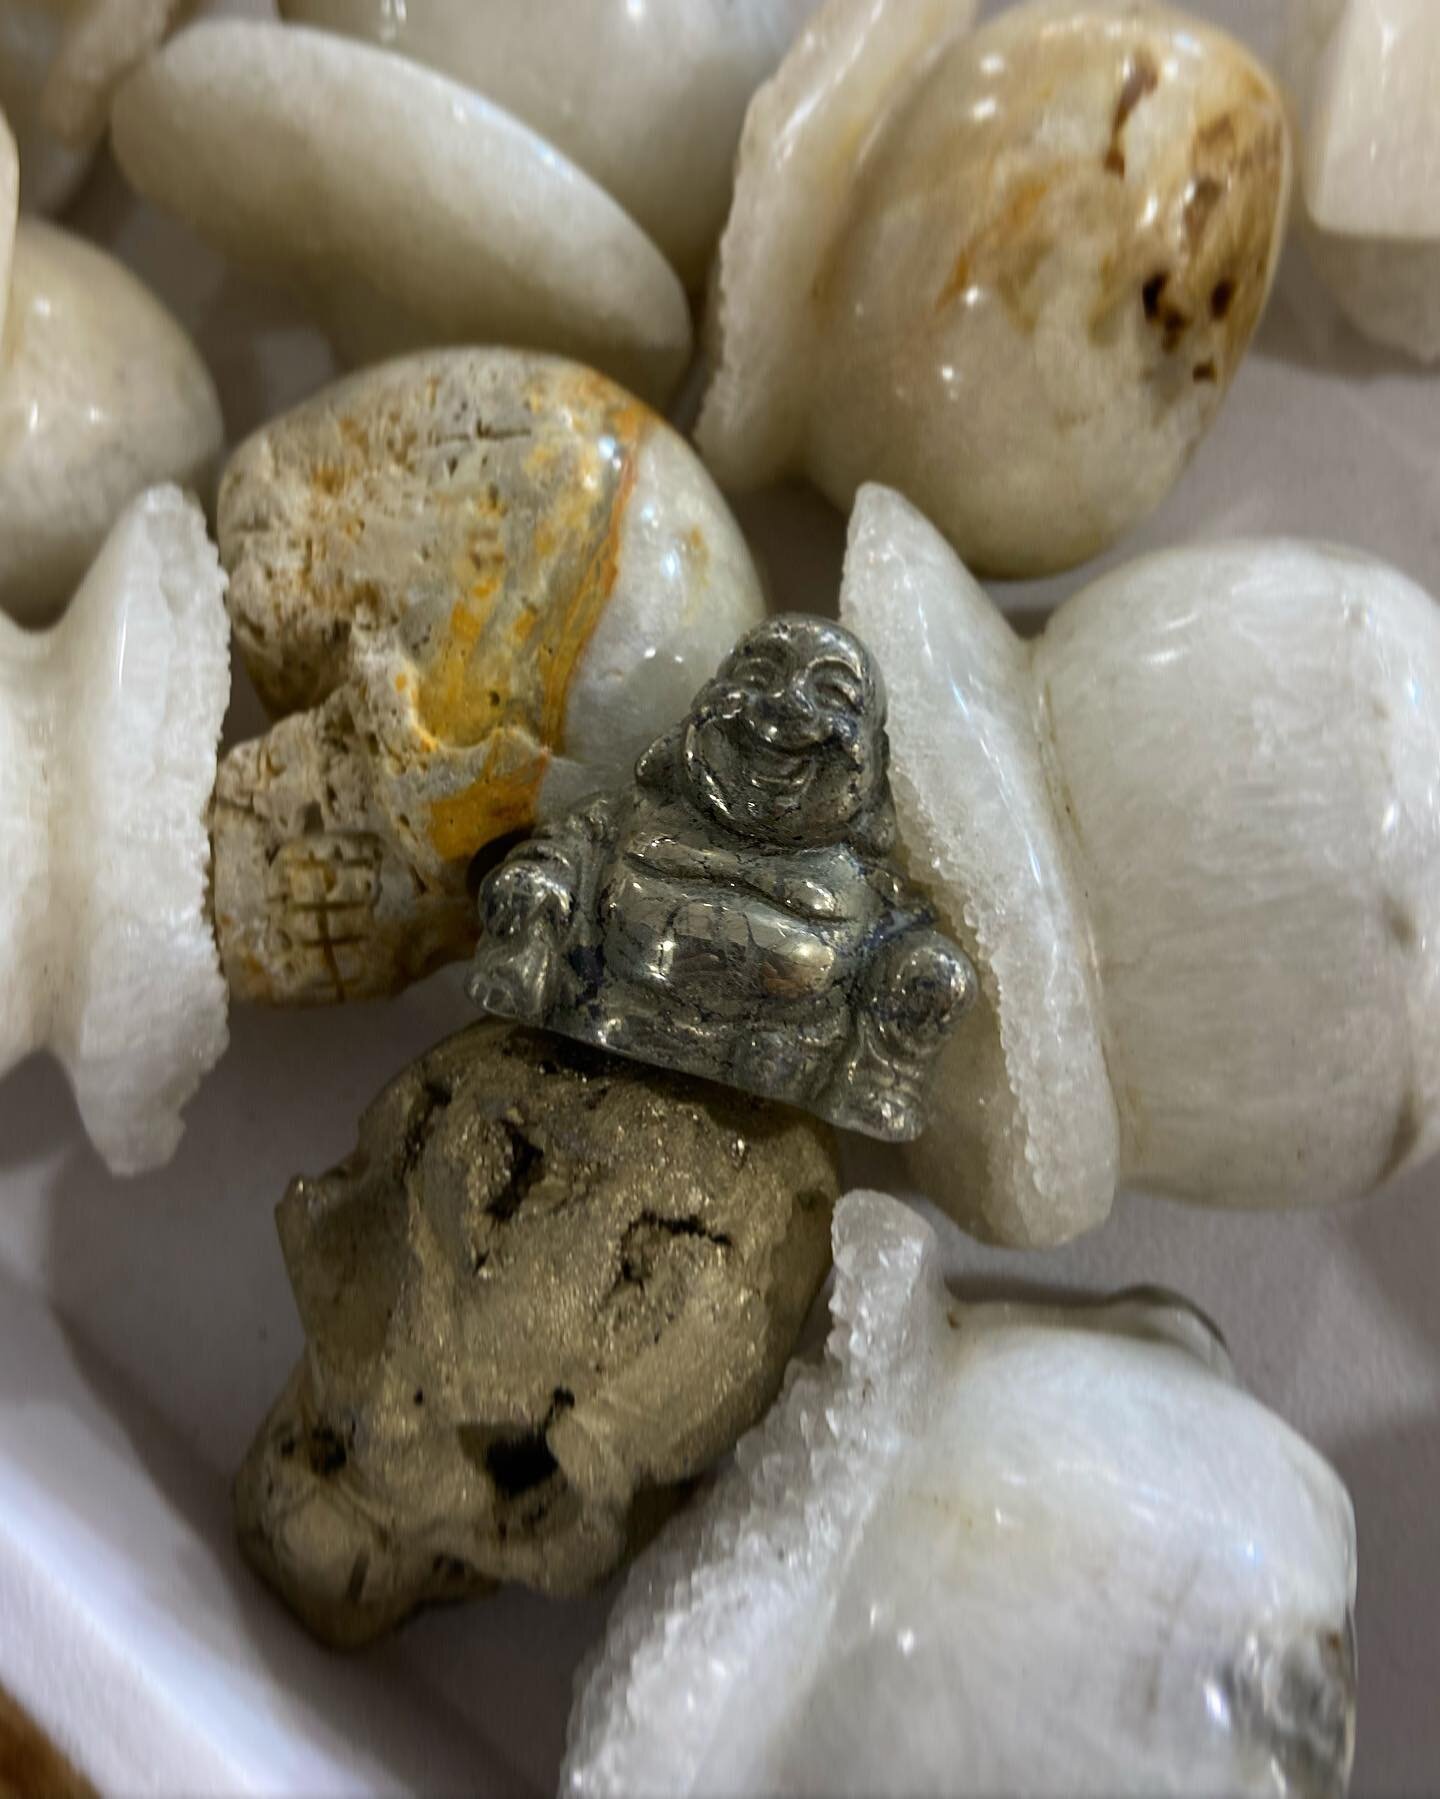 The laughing Buddha is considered as a symbol of happiness, abundance, contentment and wellbeing. Laughing Buddha statues are considered auspicious and are often kept in homes and offices for positive energy and good luck. 🙏✨🕉